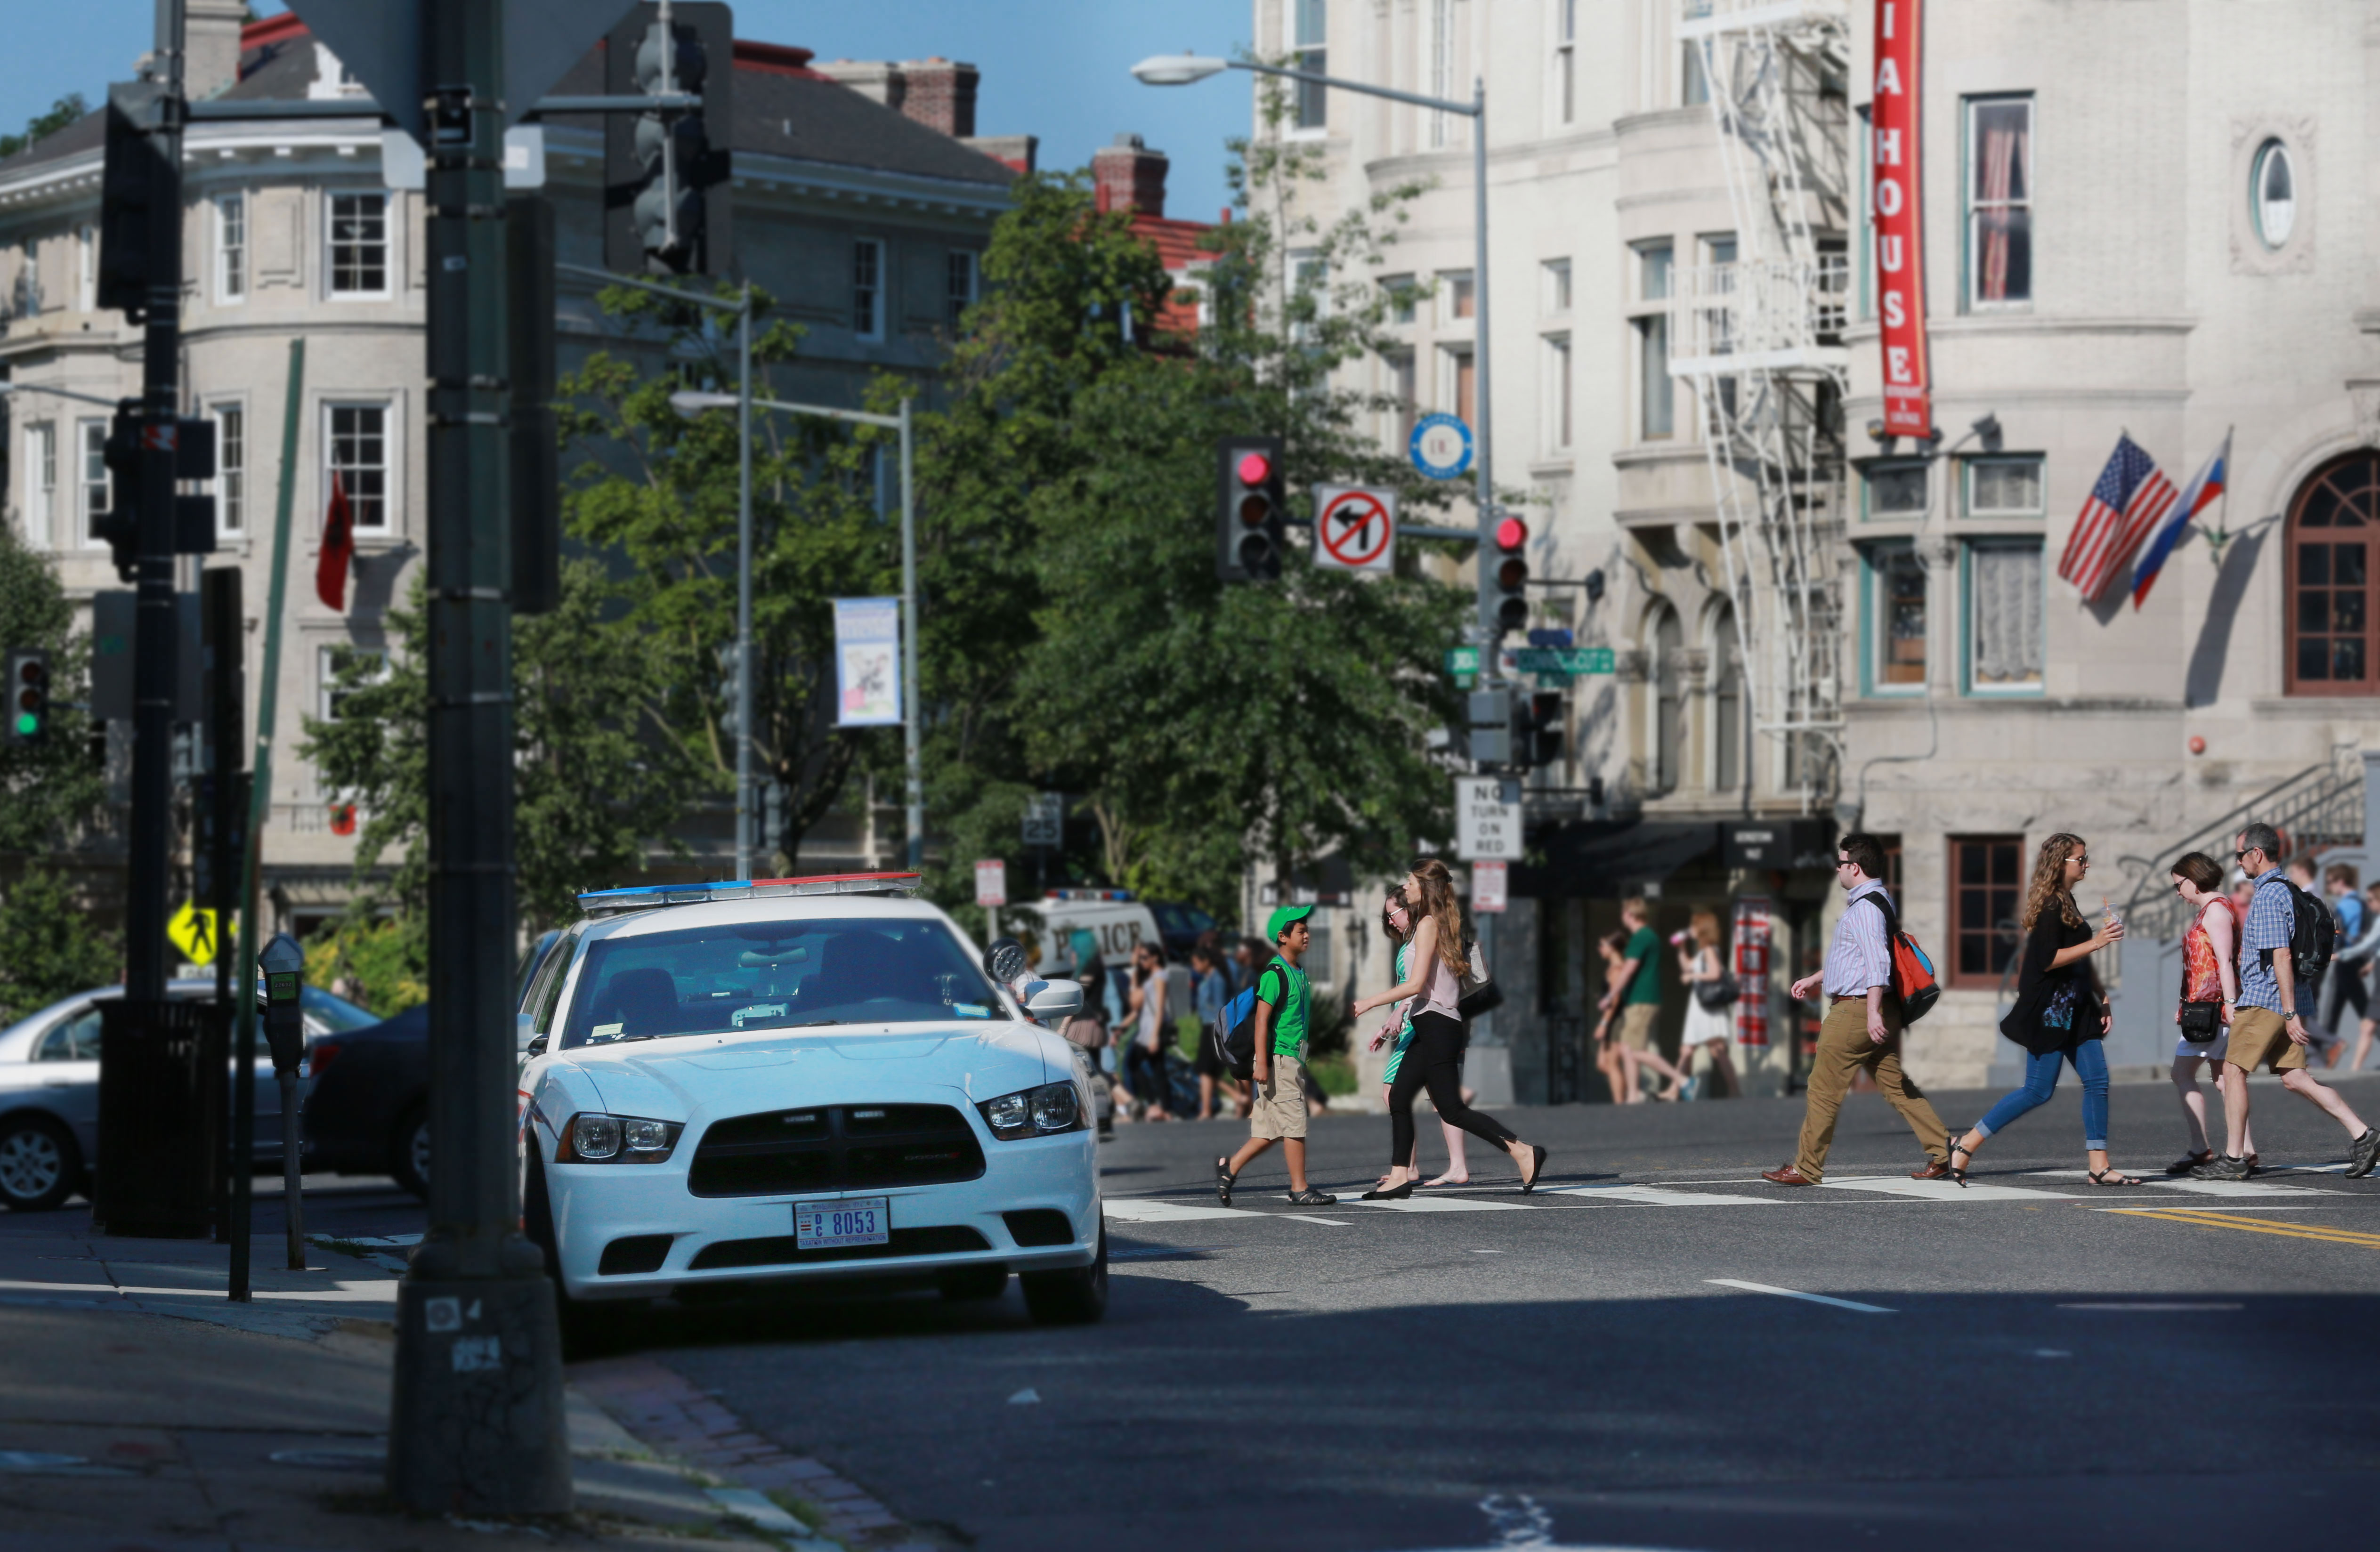 image of busy DC street with pedestrians and police car